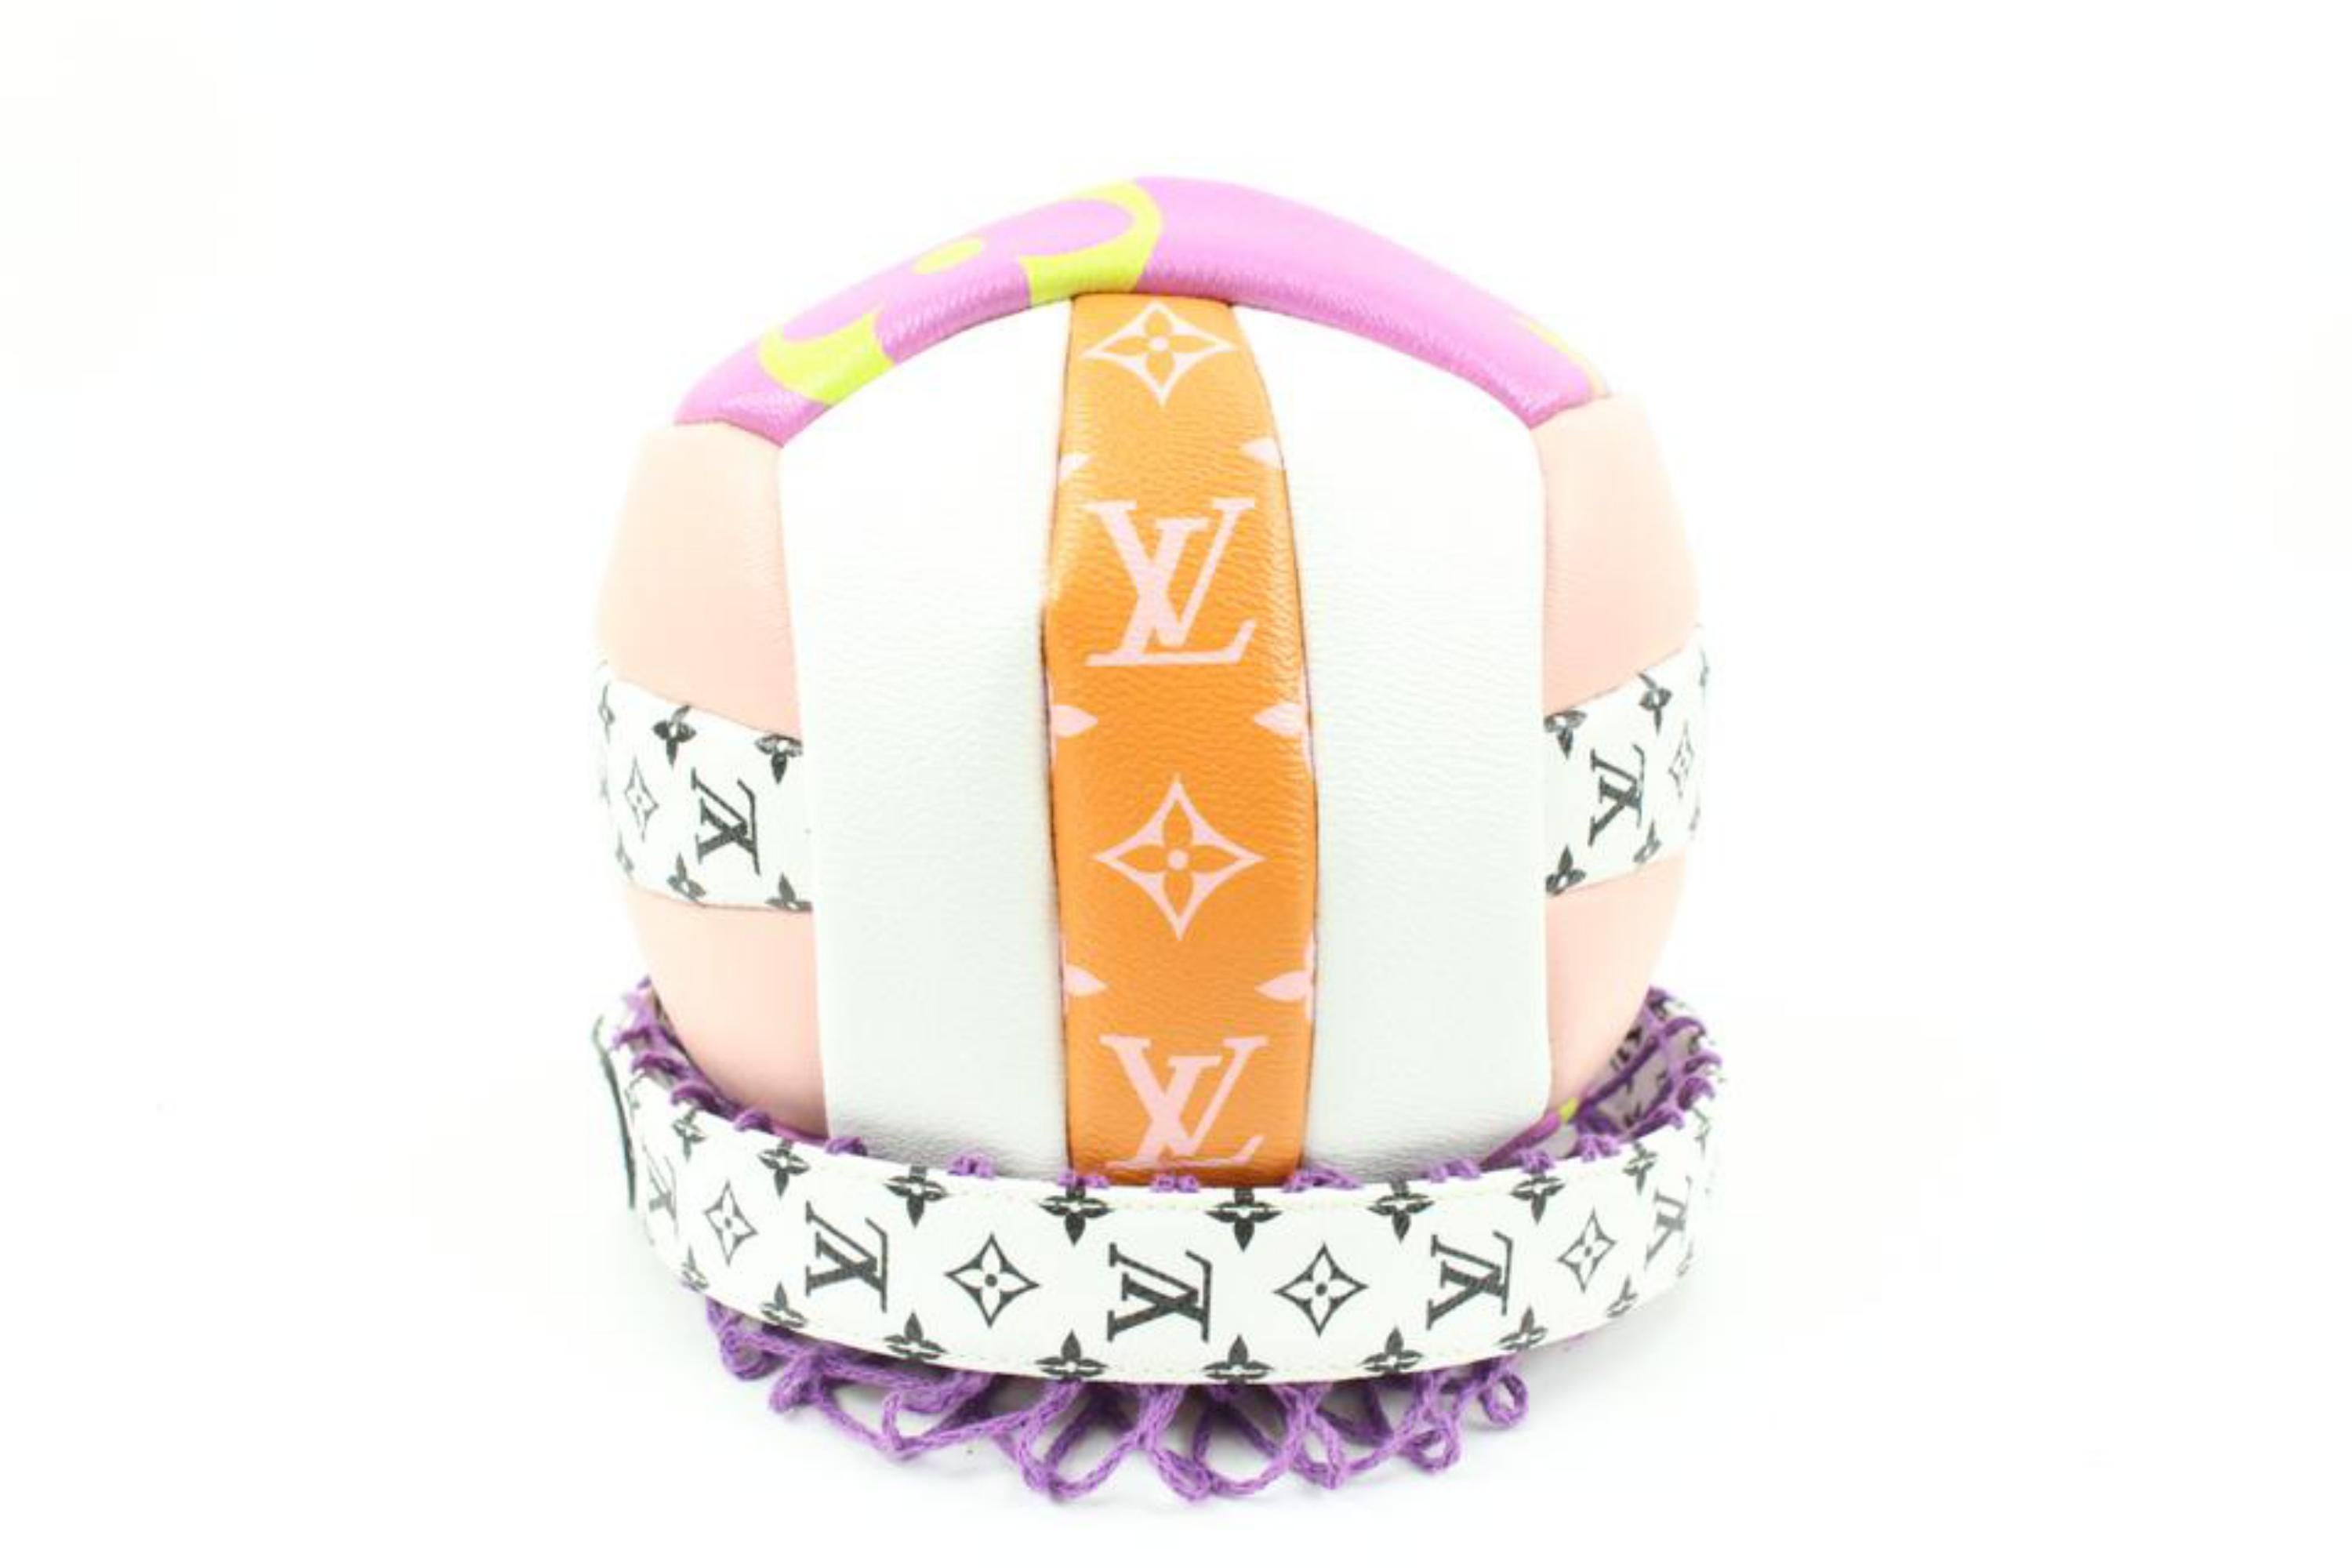 Louis Vuitton SS20 Limited Pink x Orange Monogram Giant Volleyball 121lv43 For Sale 1